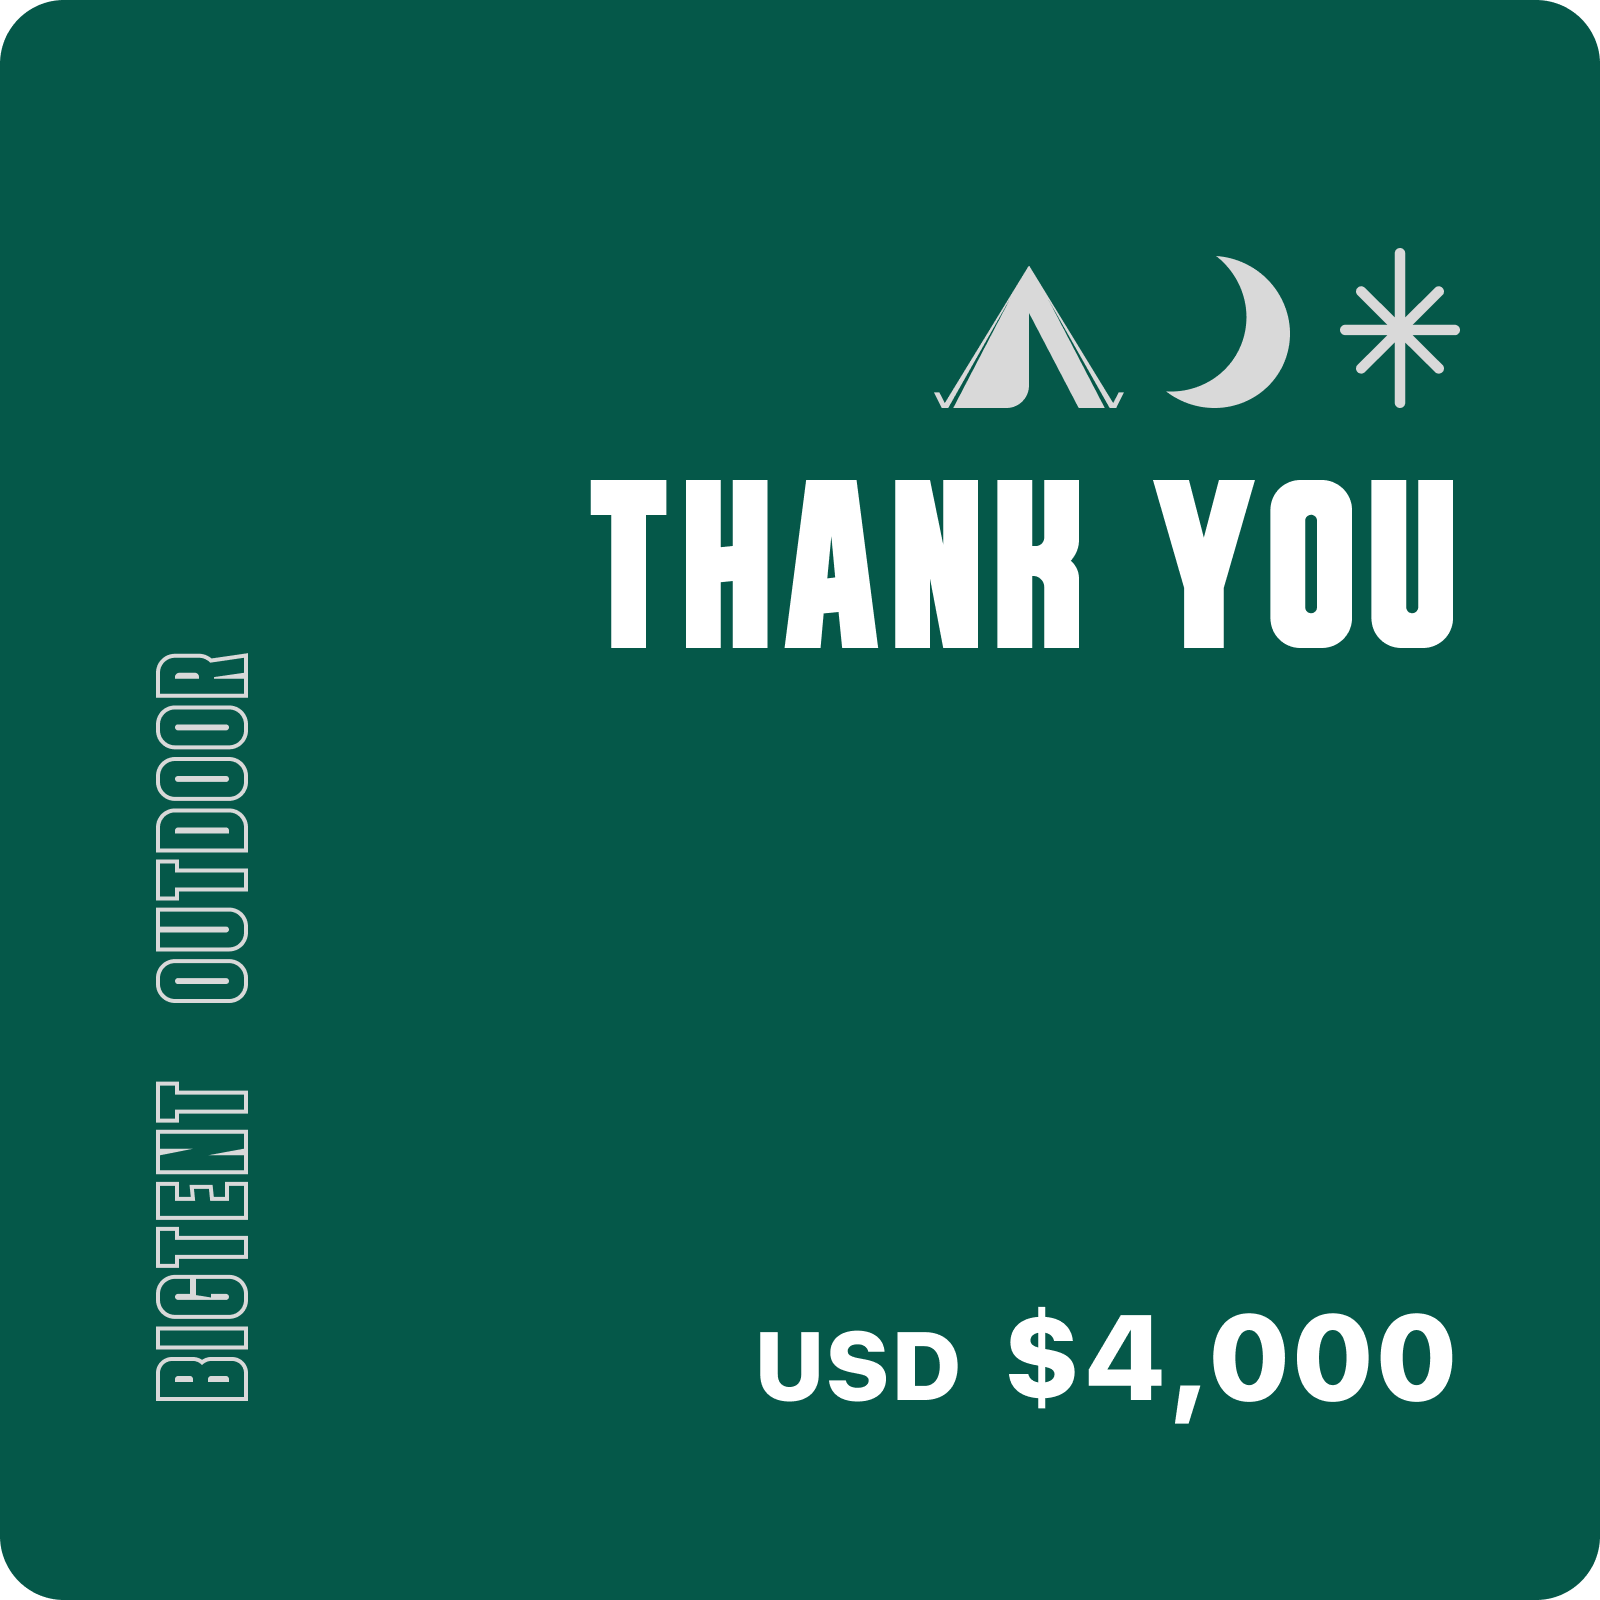 bigtent giftcard $4,000 usd